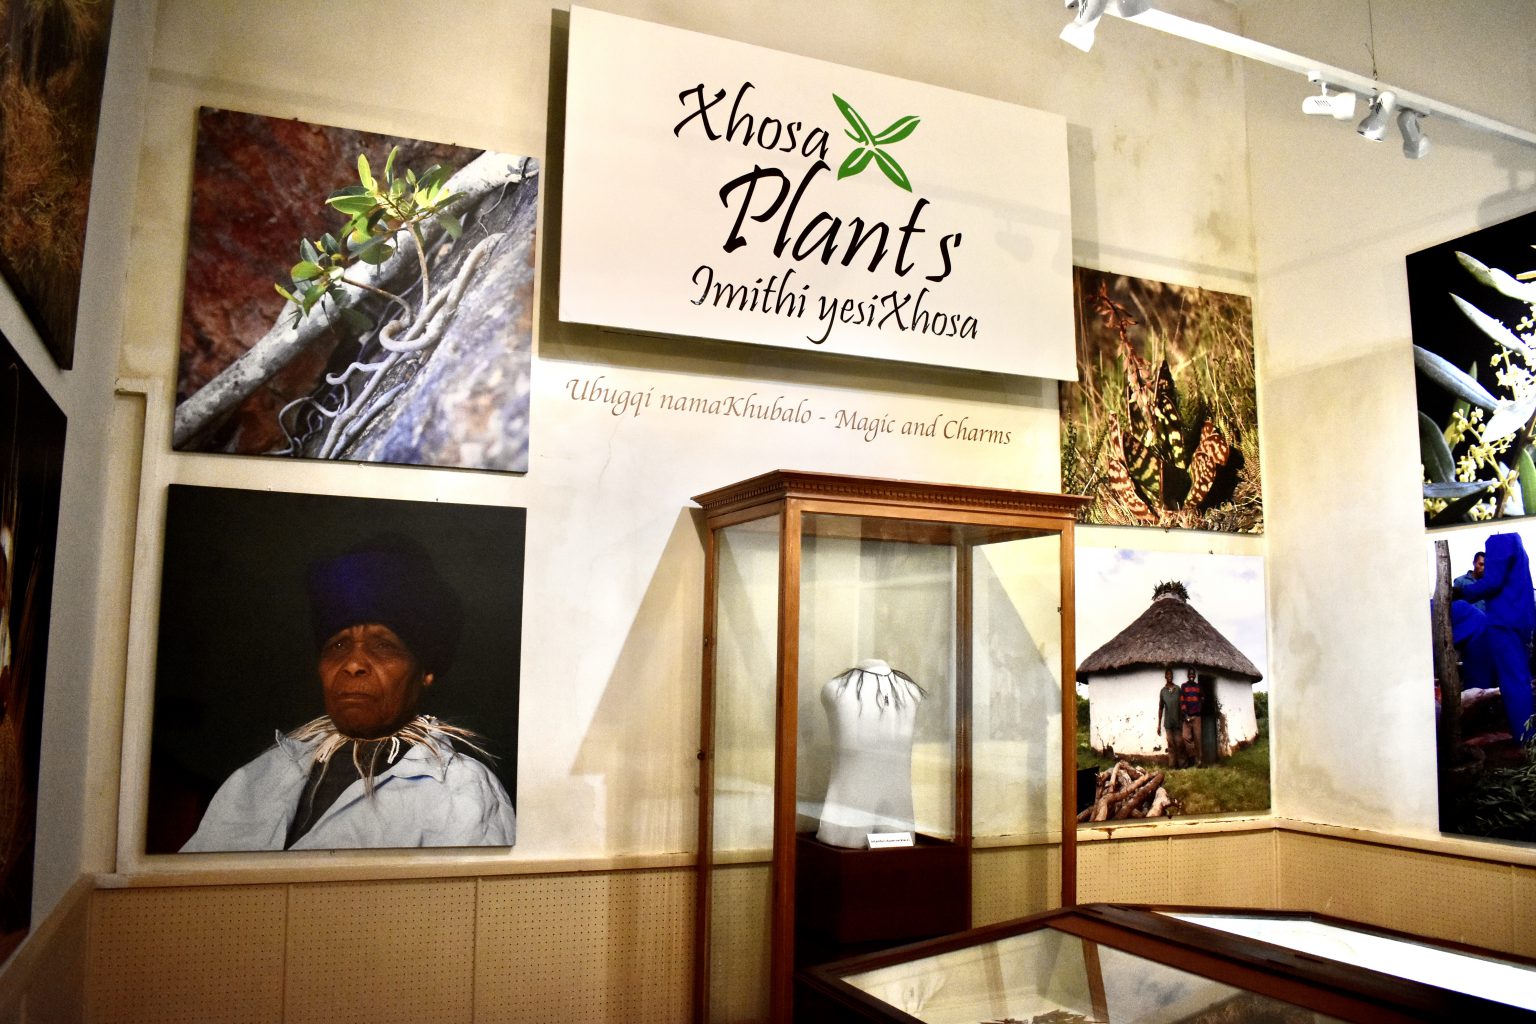 The Xhosa Plant exhibition, Albany science museum.